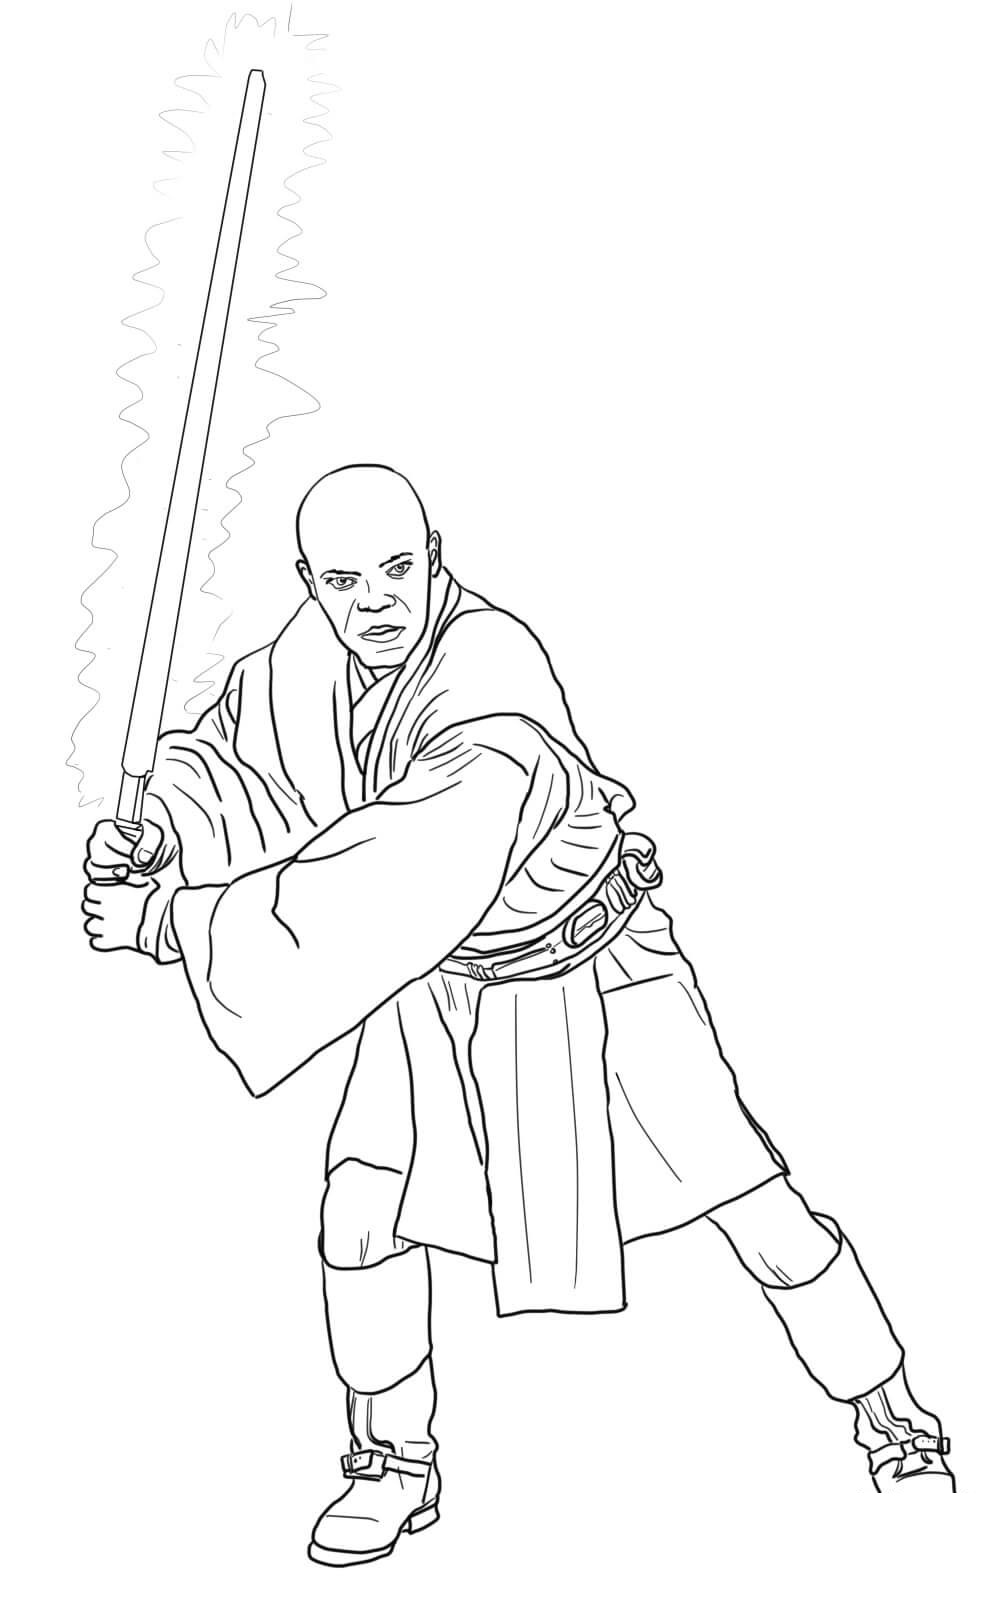 Mace Windu Star Wars Episode II Attack Of The Clones Coloring Page